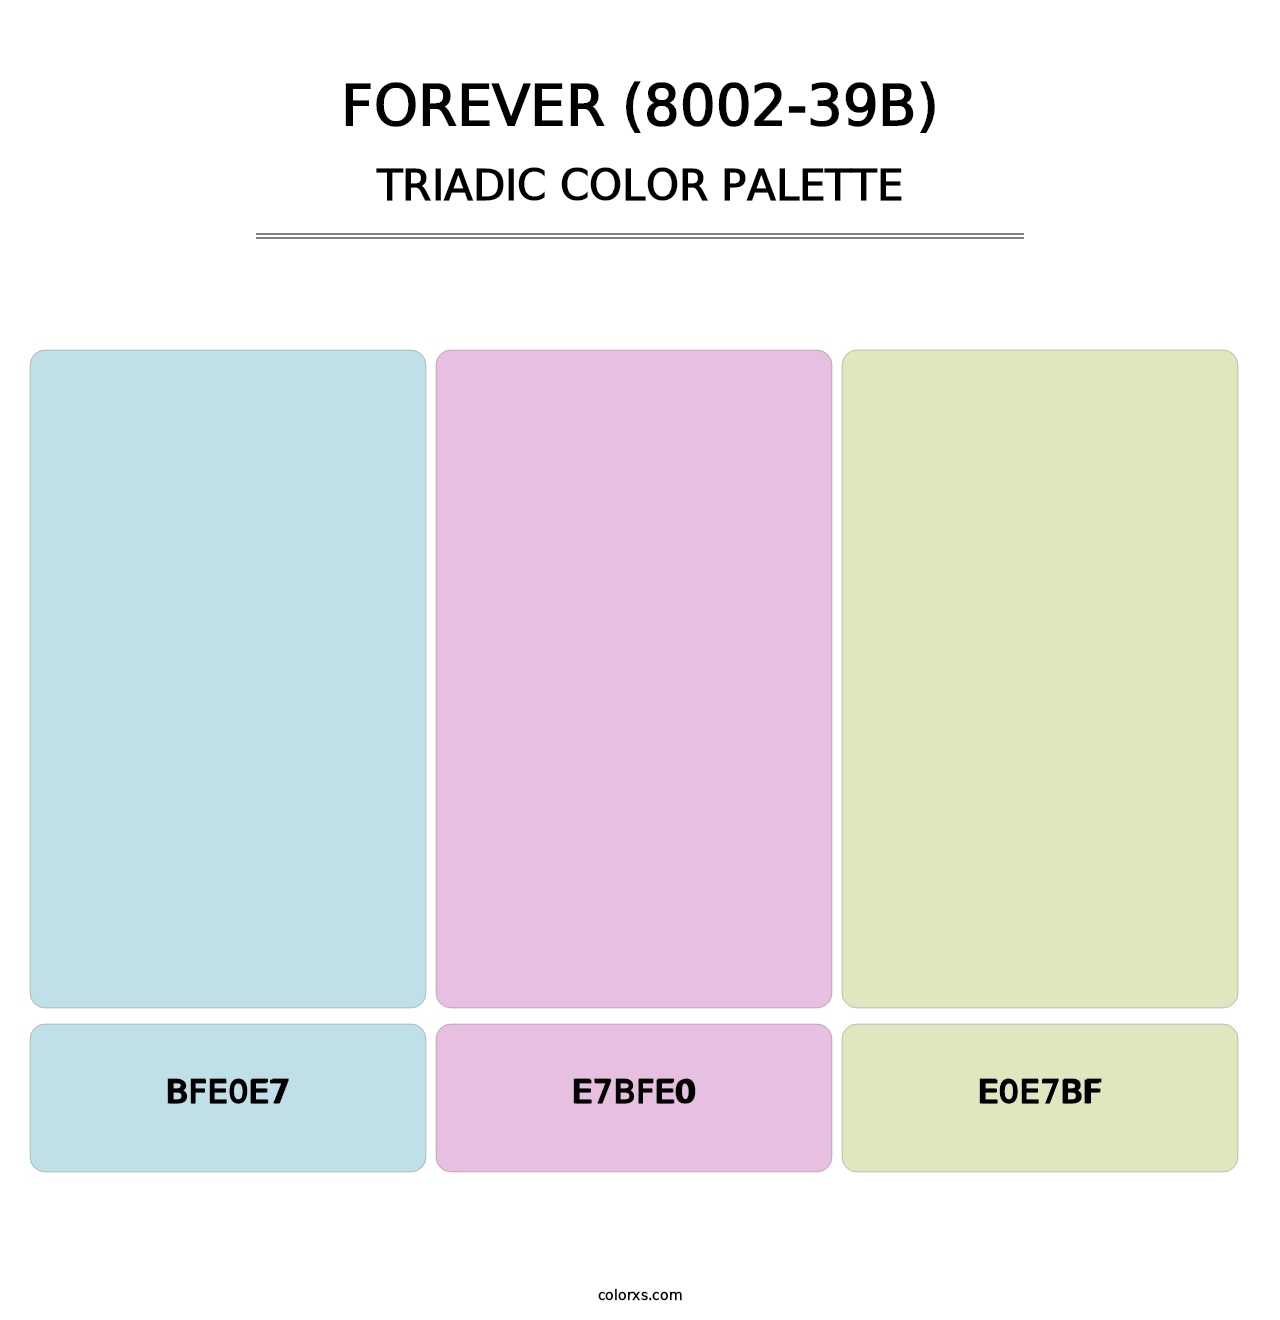 Forever (8002-39B) - Triadic Color Palette